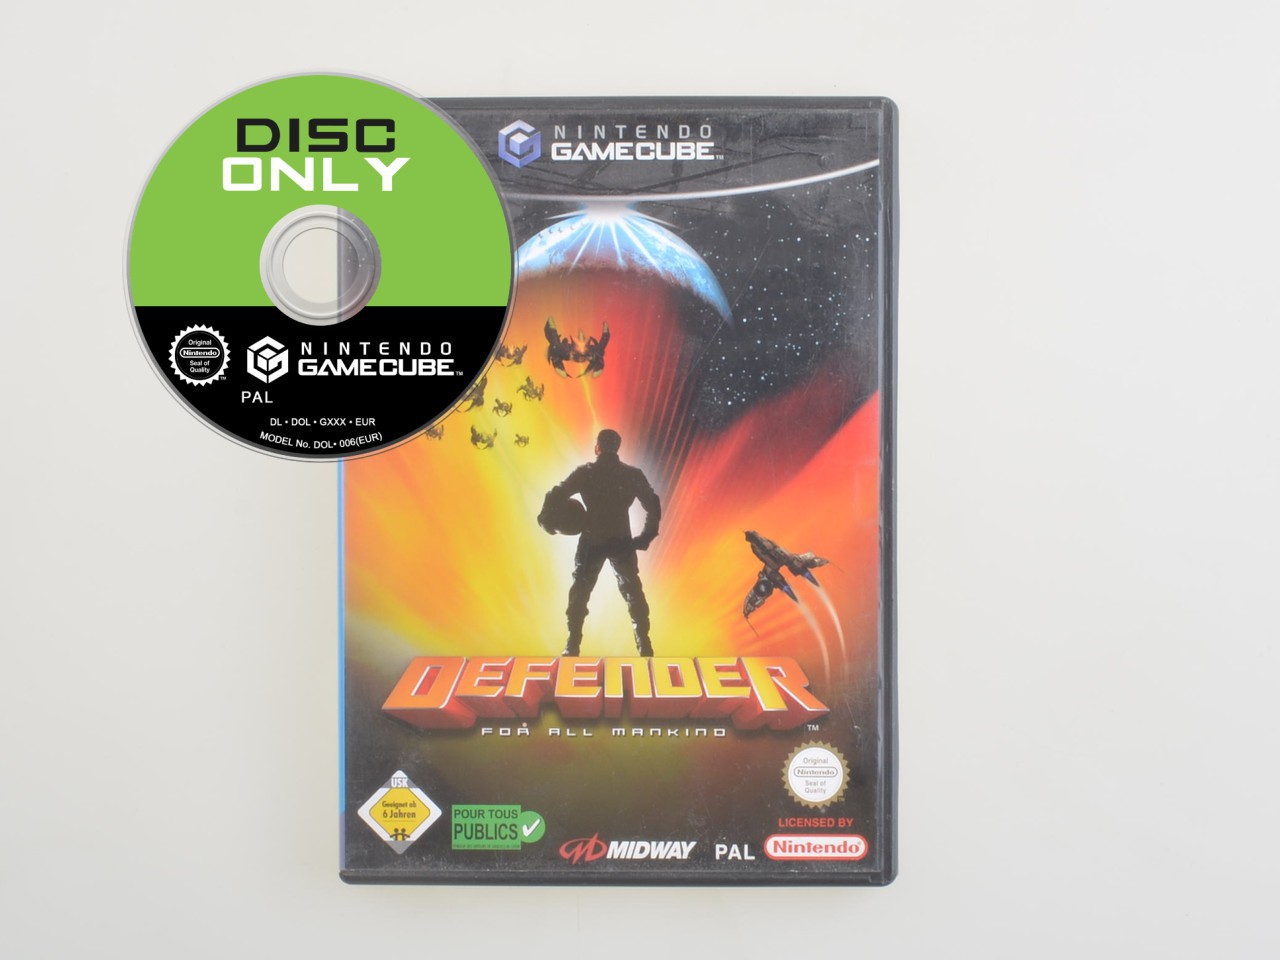 Defender For all Mankind - Disc Only Kopen | Gamecube Games